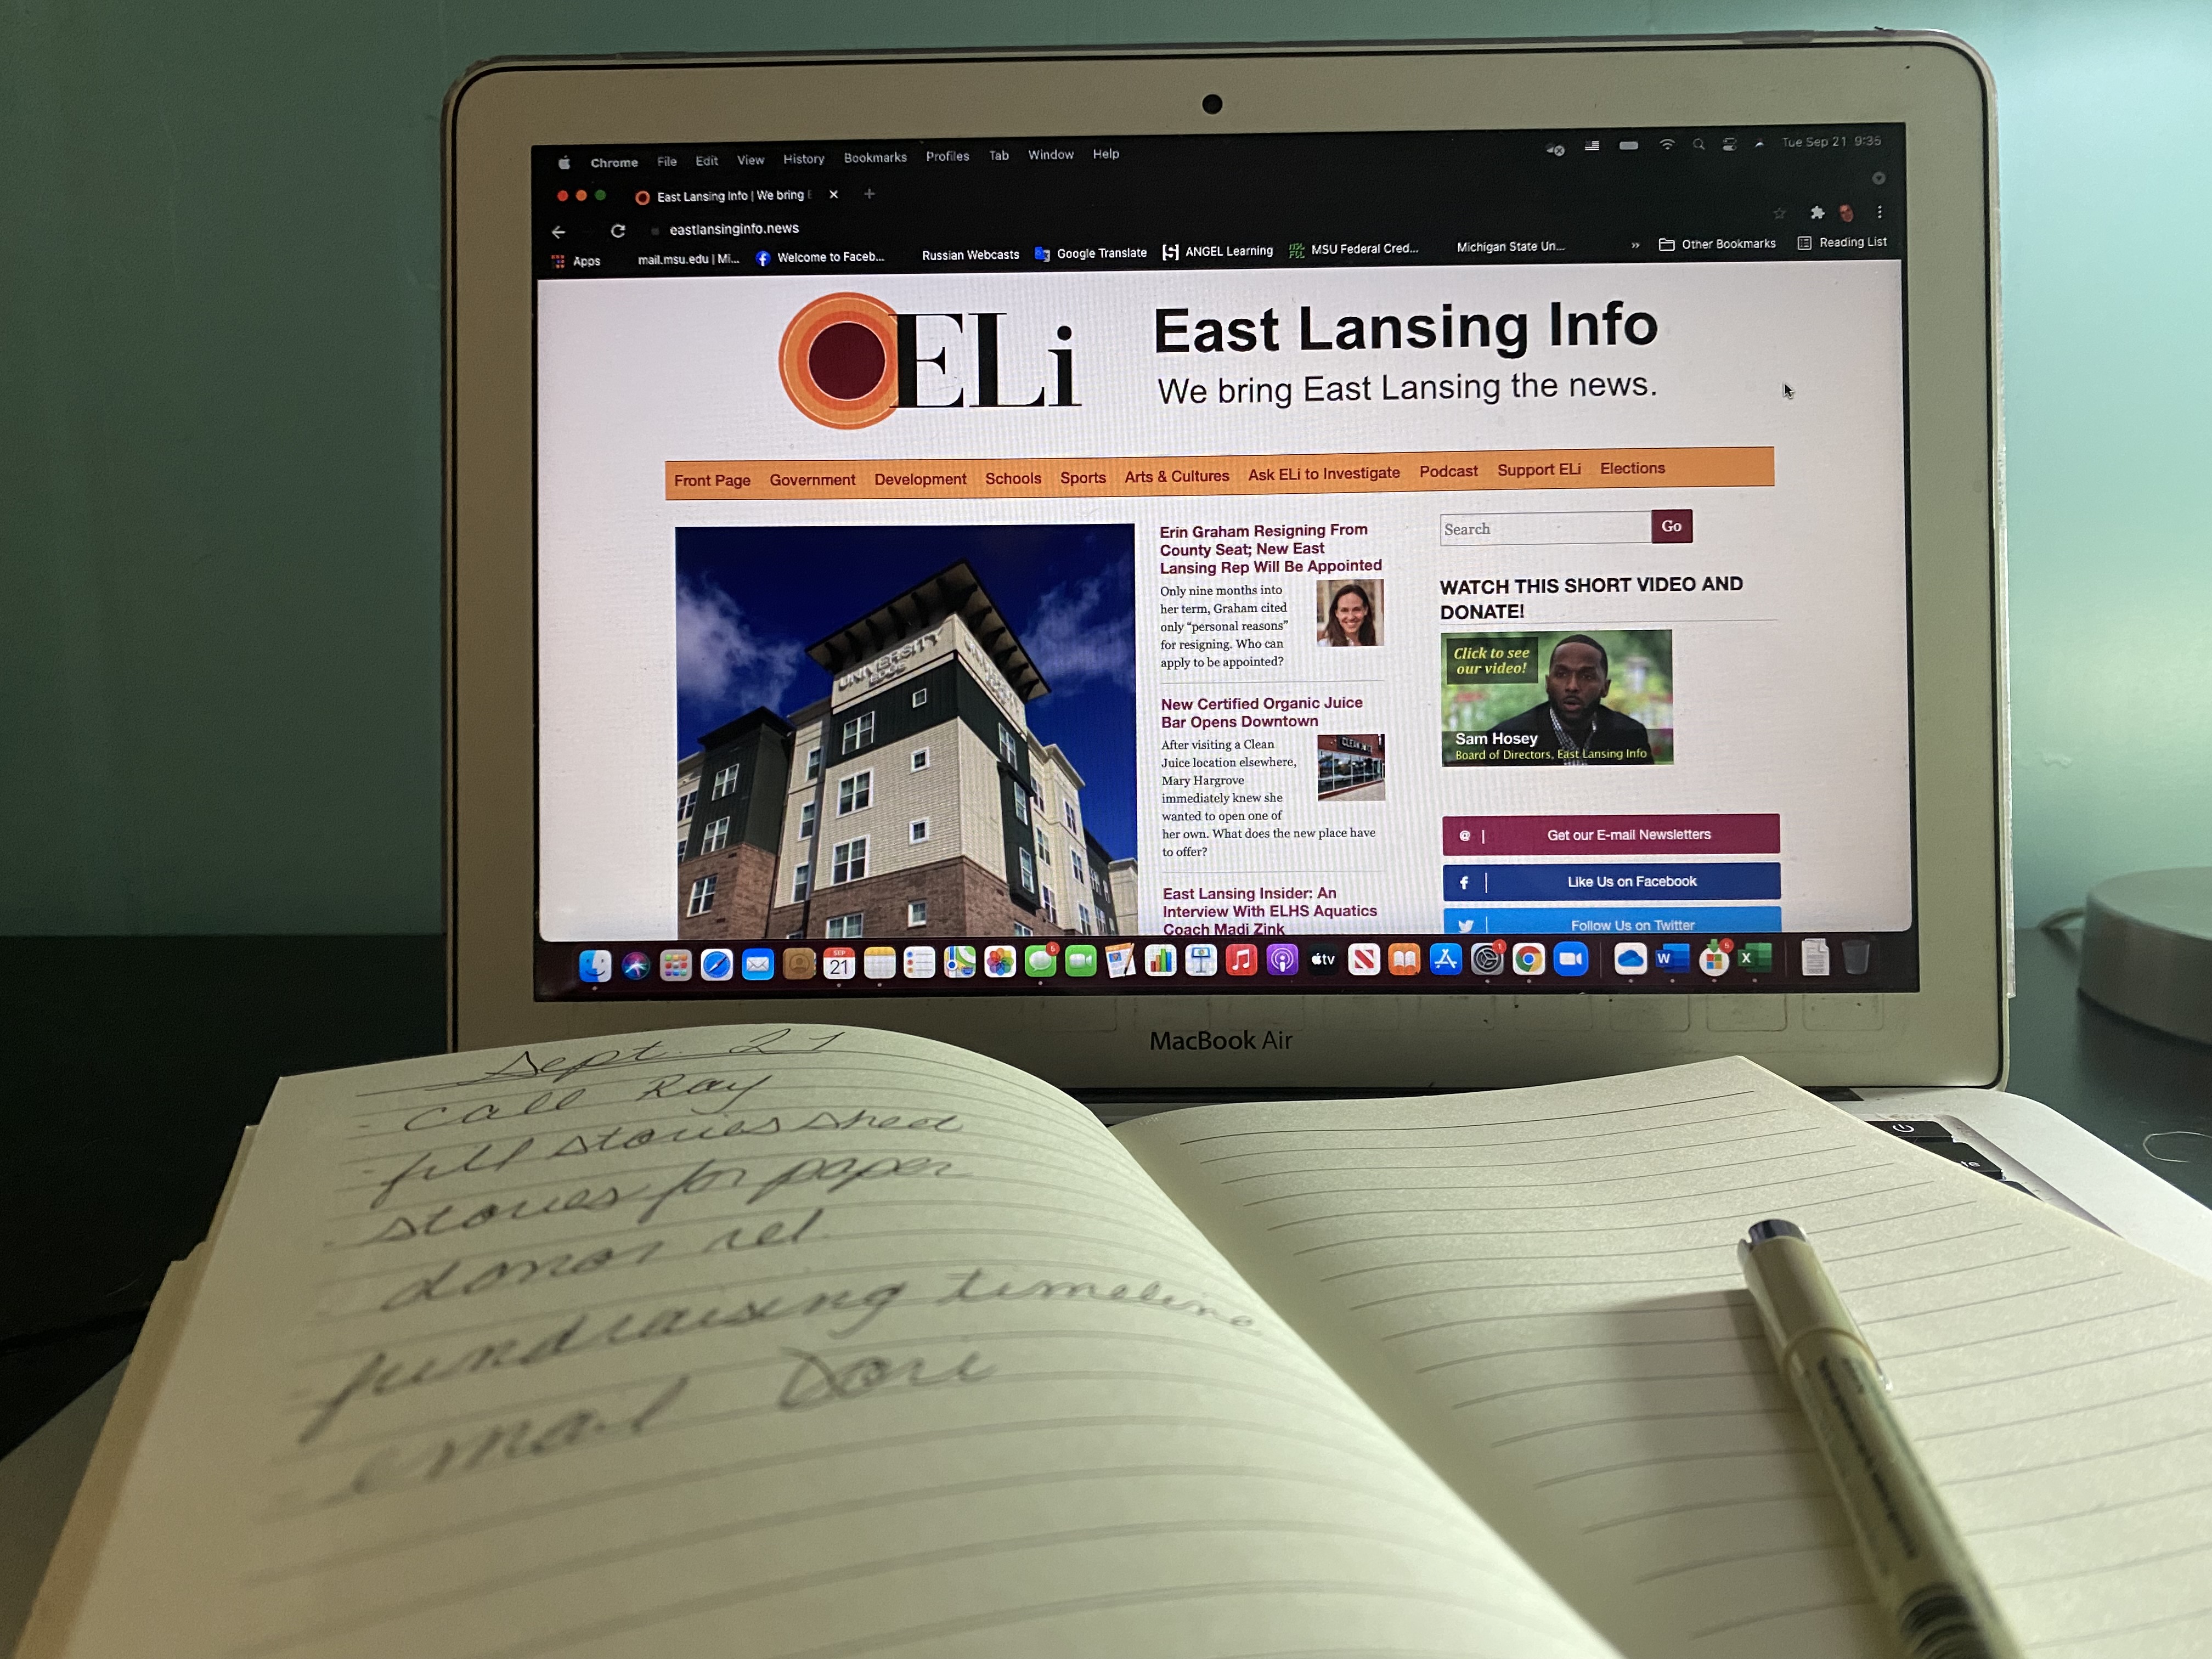 As managing editor at East Lansing Info, Emily Joan Elliott likens her role to being a “dean of reporters.”